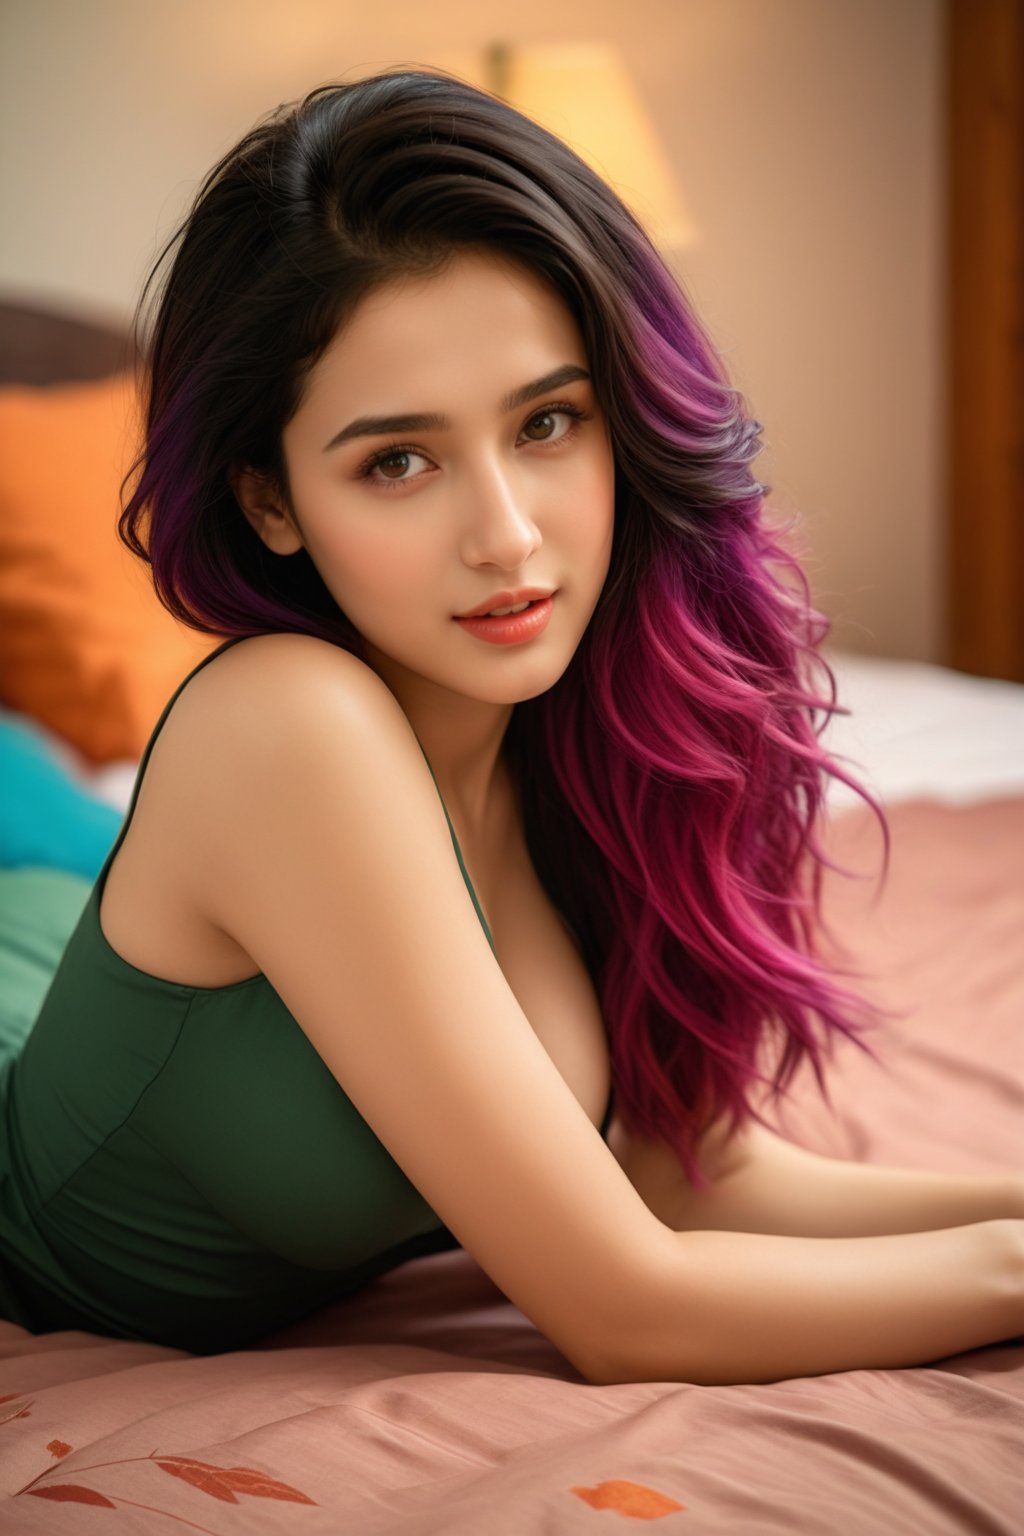 (majestic:1.5), hyper realistic, highly detailed, uhd:1.3, RAW photo, A vibrant teenage  army girl, 18 years old, very fair complexion, pale skin:1.3, ( kriti sannon:1.2), (shraddha kapoor:0.8), cute cleavage visible, perfect natural large-medium breasts, with long black hair, detailed and shinning glossy lips, detailed nose, detailed teeth, detailed glossy lips, sits cozily on a warm-toned bed  in her bedroom, cushion, pillows, satan bed sheet, seductive pose, flirty, . Her colourful hair takes center stage as she dances playfully, her eyes sparkling with joy.The soft lighting and rustic wooden flooring create a cozy atmosphere, while the army take off her uniform,cap,smile ,full body view, adds a pop of vibrancy to the scene., extremely detailed surroundings, intricately detailed, very natural, very photorealistic , full-body_portrait